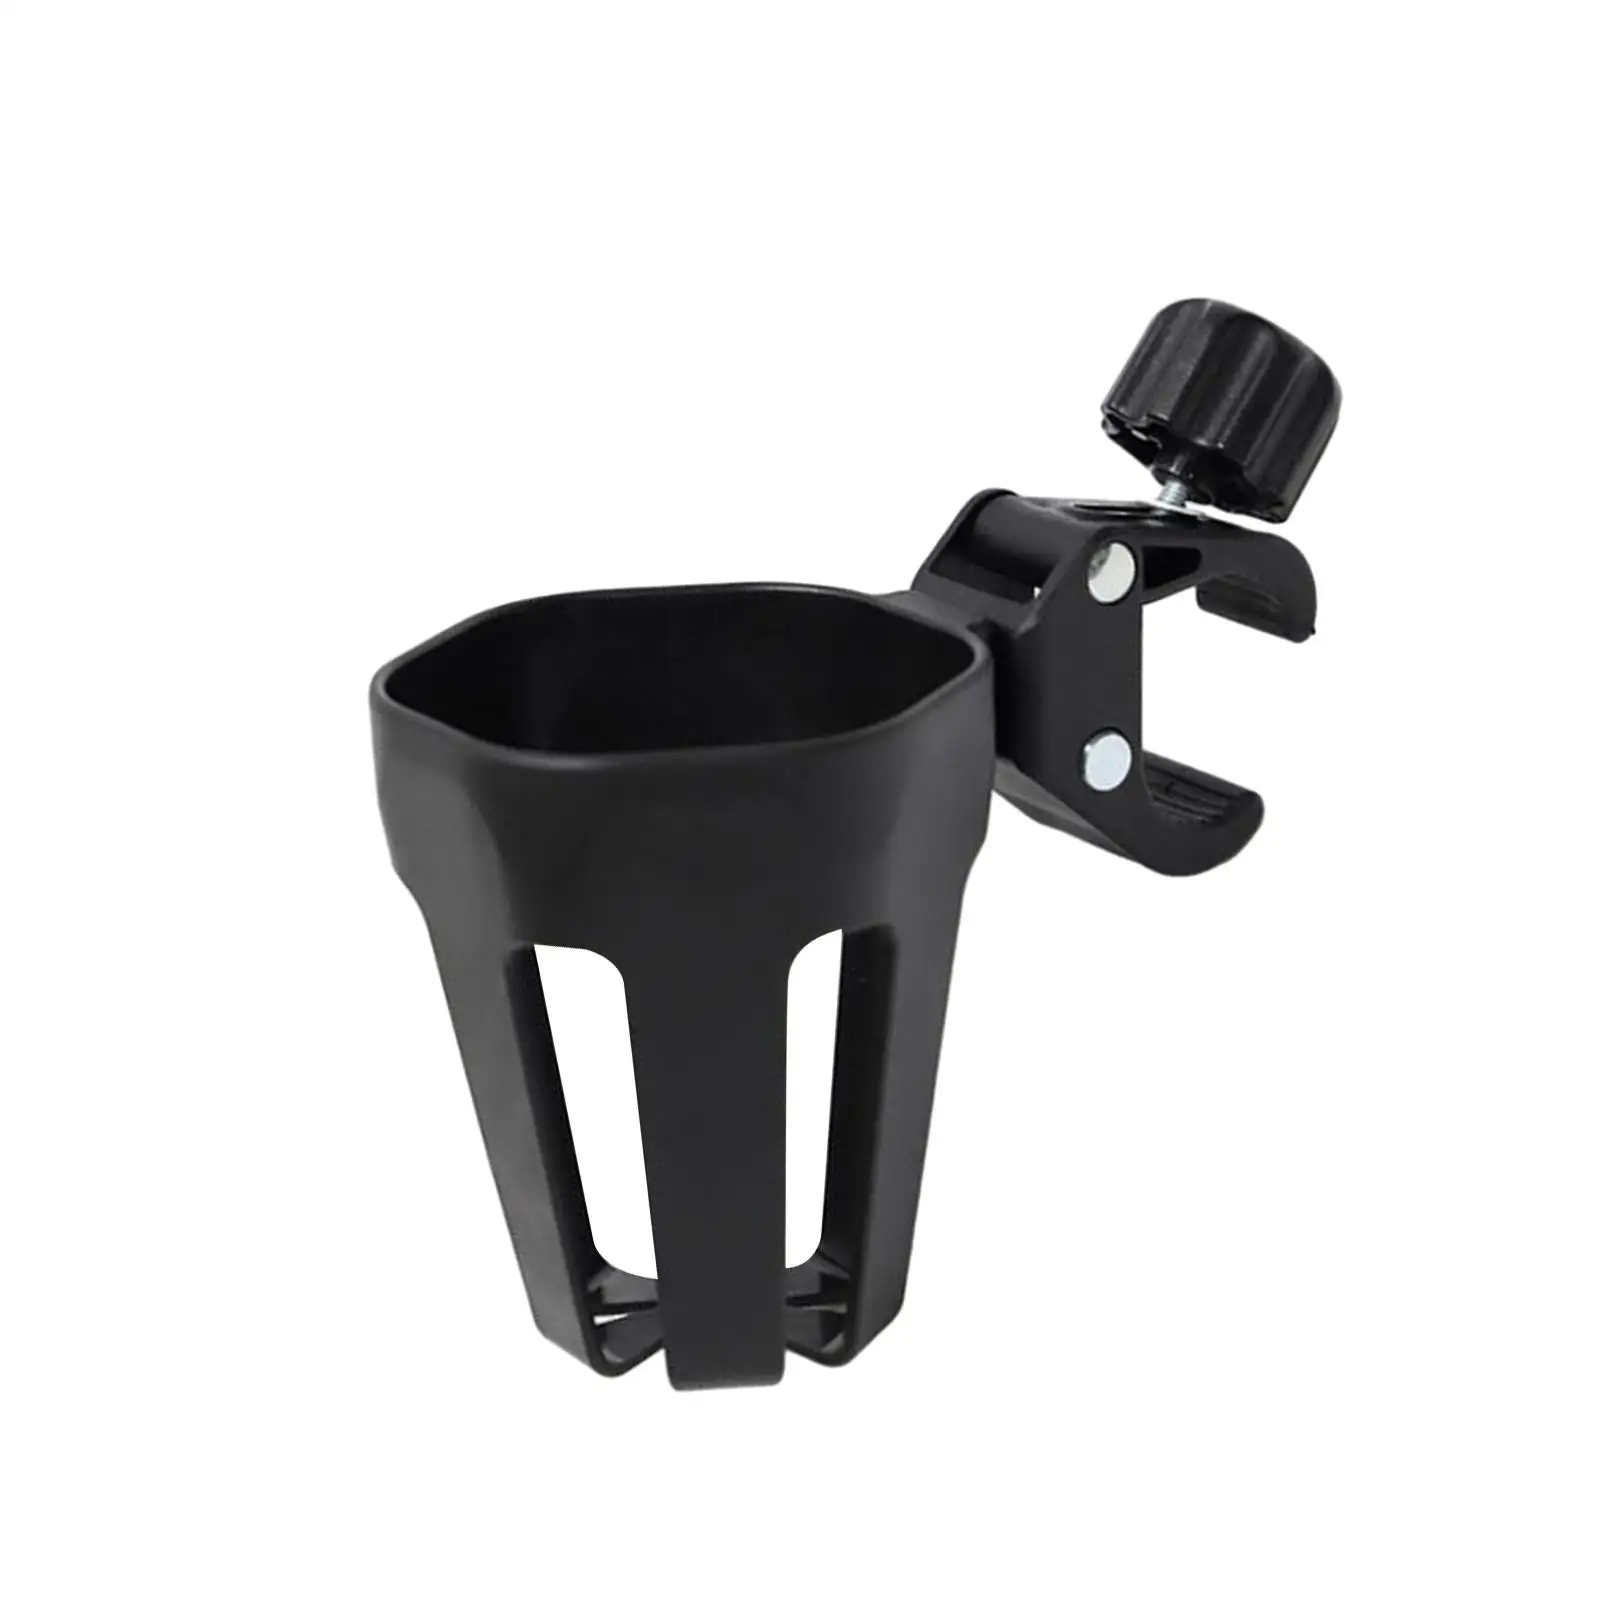 Universal Drink Coffee Cup Holder Bicycle Cup Holder for Pram Scooter